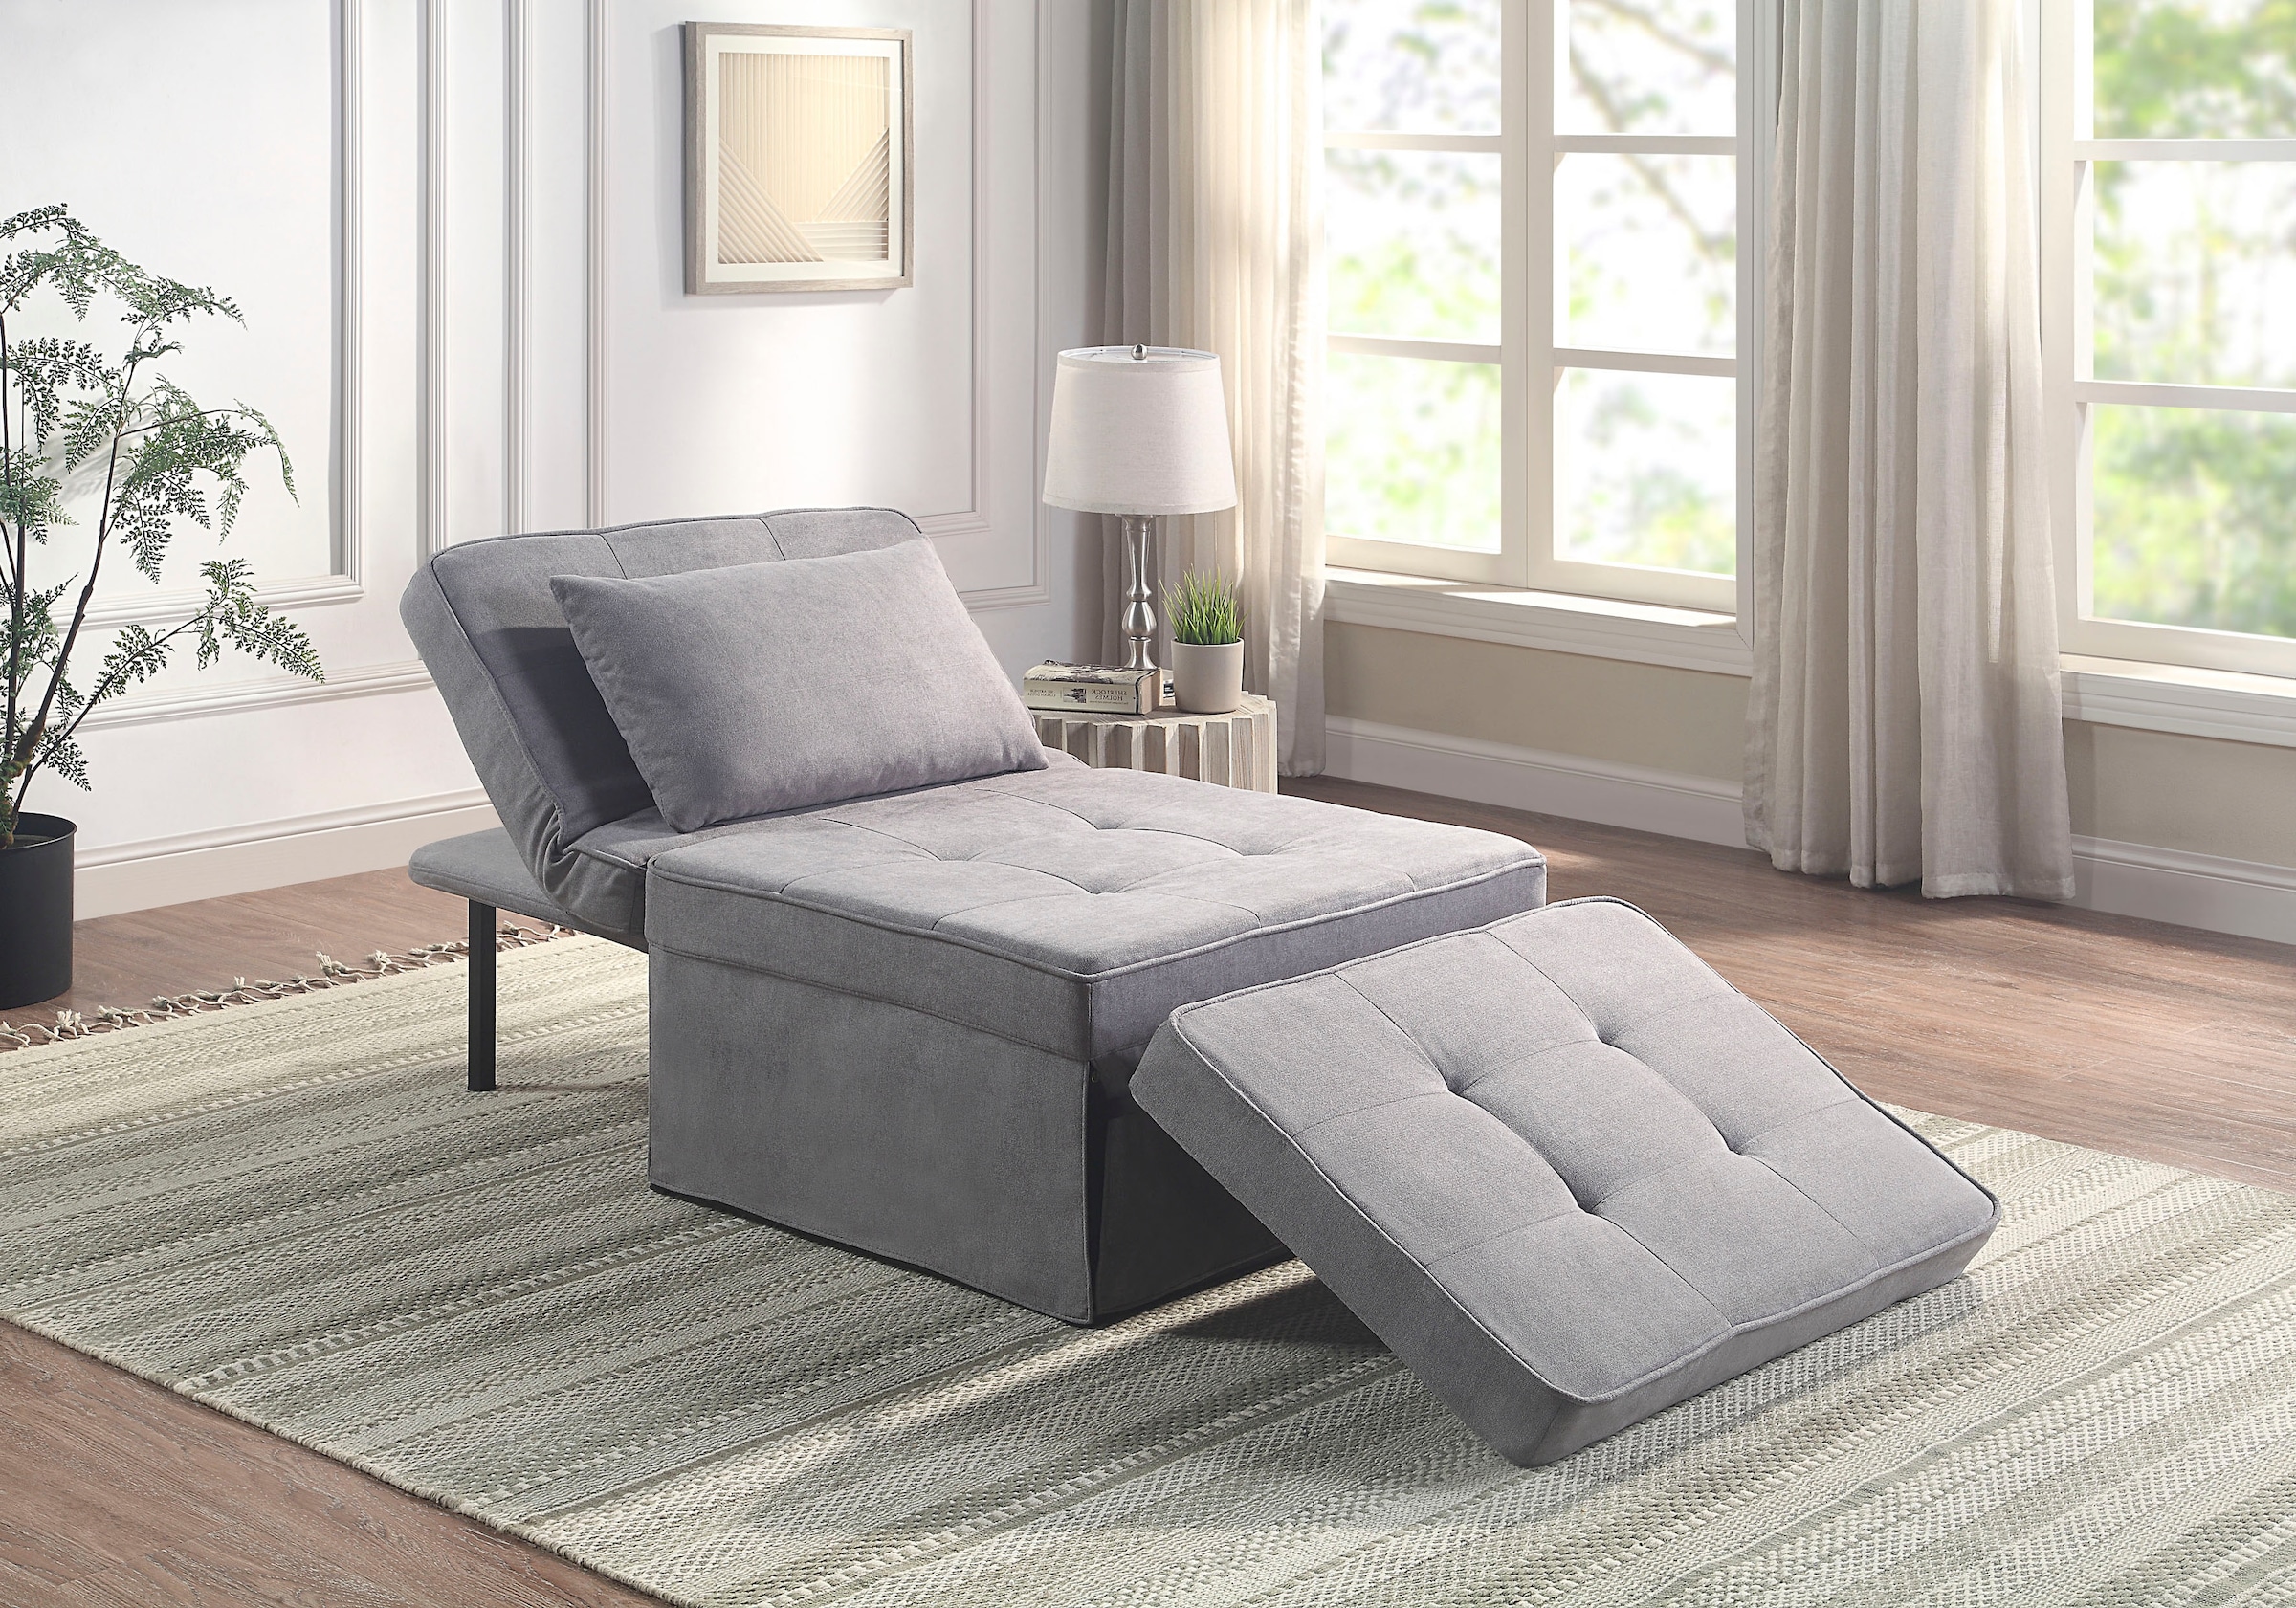 ATLANTIC home collection “Finn” sofa bed, convertible into a lounge chair, lounger or guest bed, including pillows